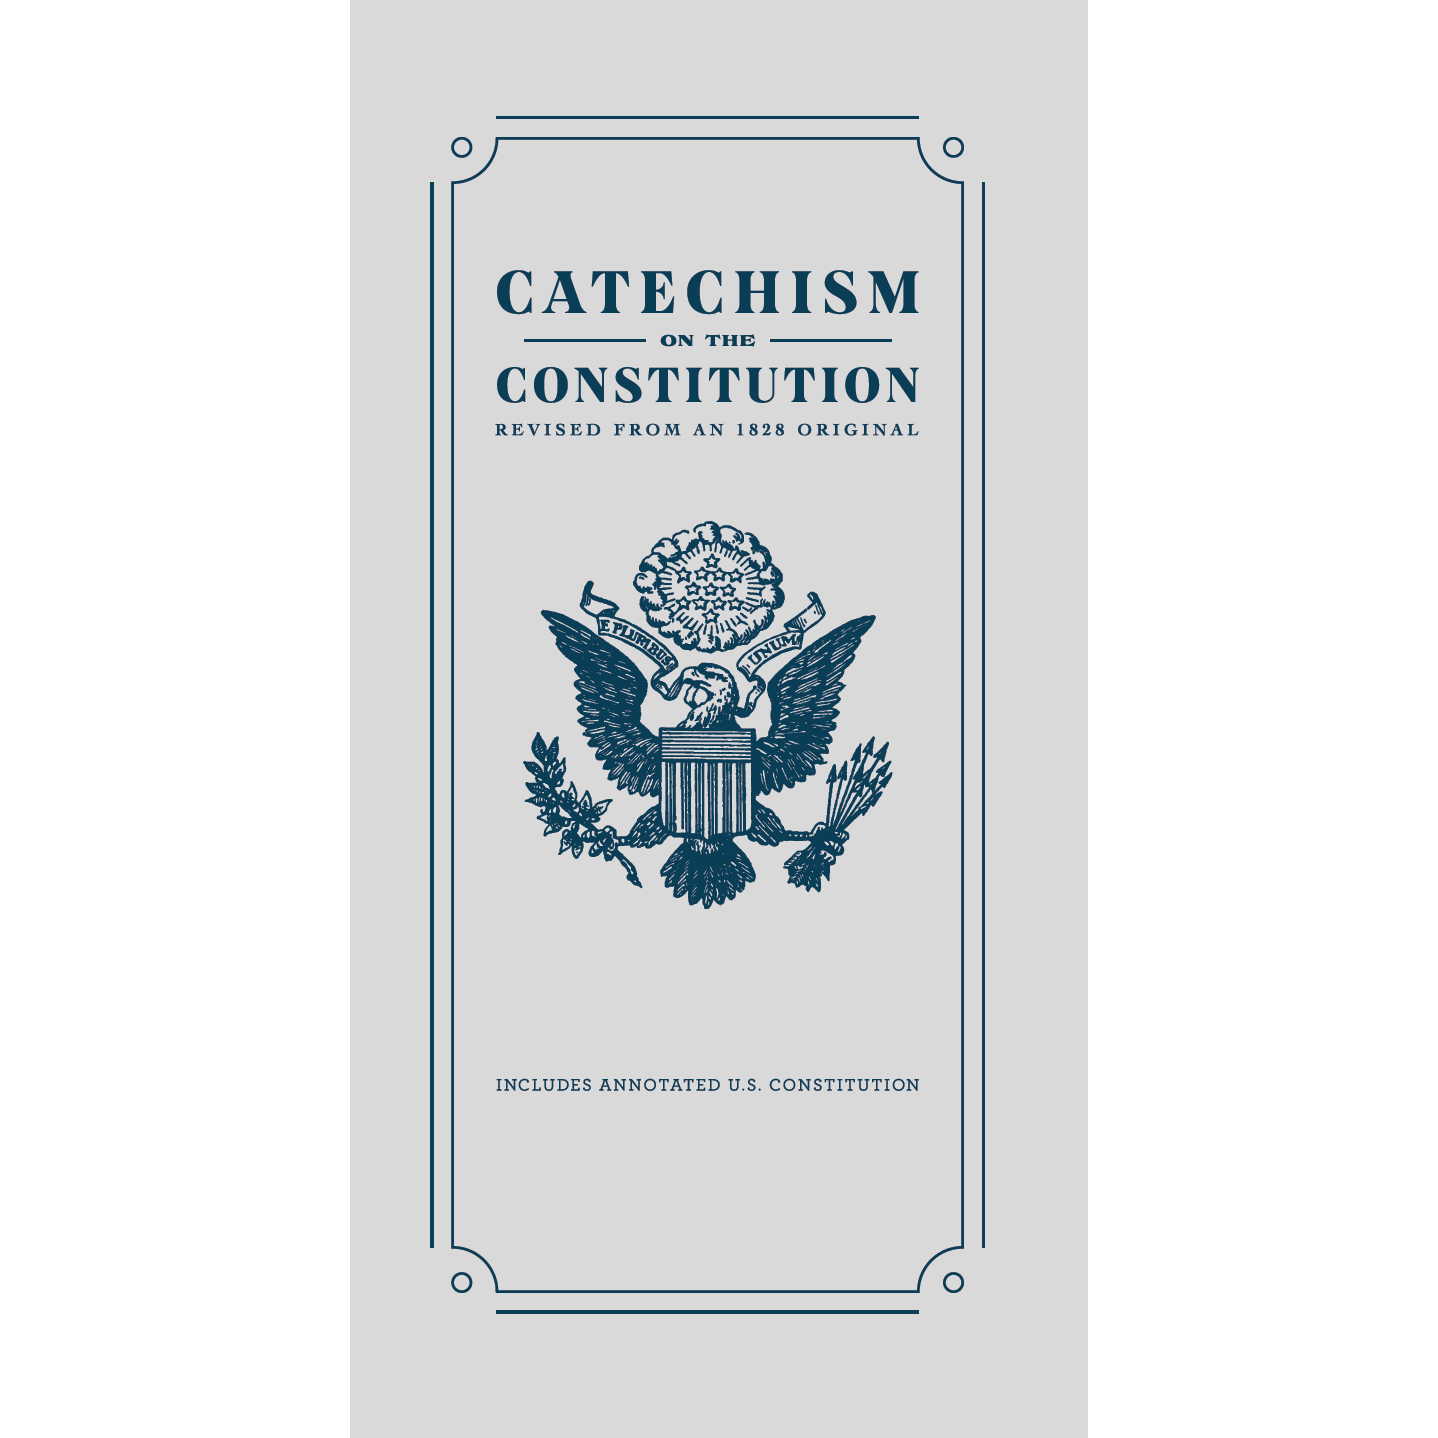 Catechism on the Constitution: Revised from an 1828 Original - American Campfire Revival